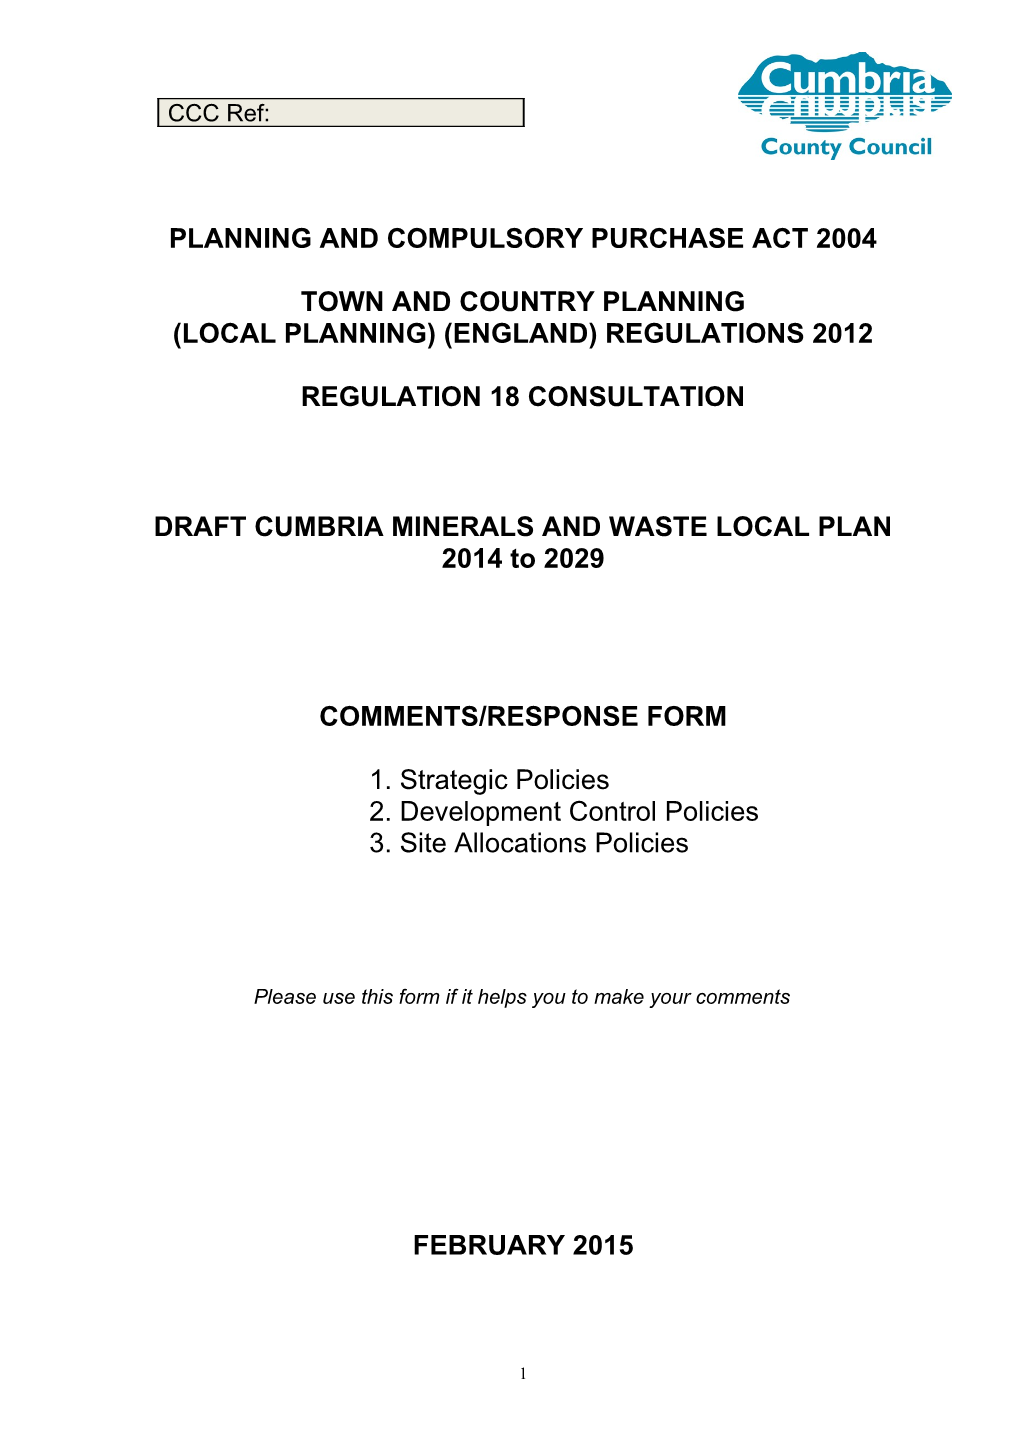 Planning and Compulsory Purchase Act 2004